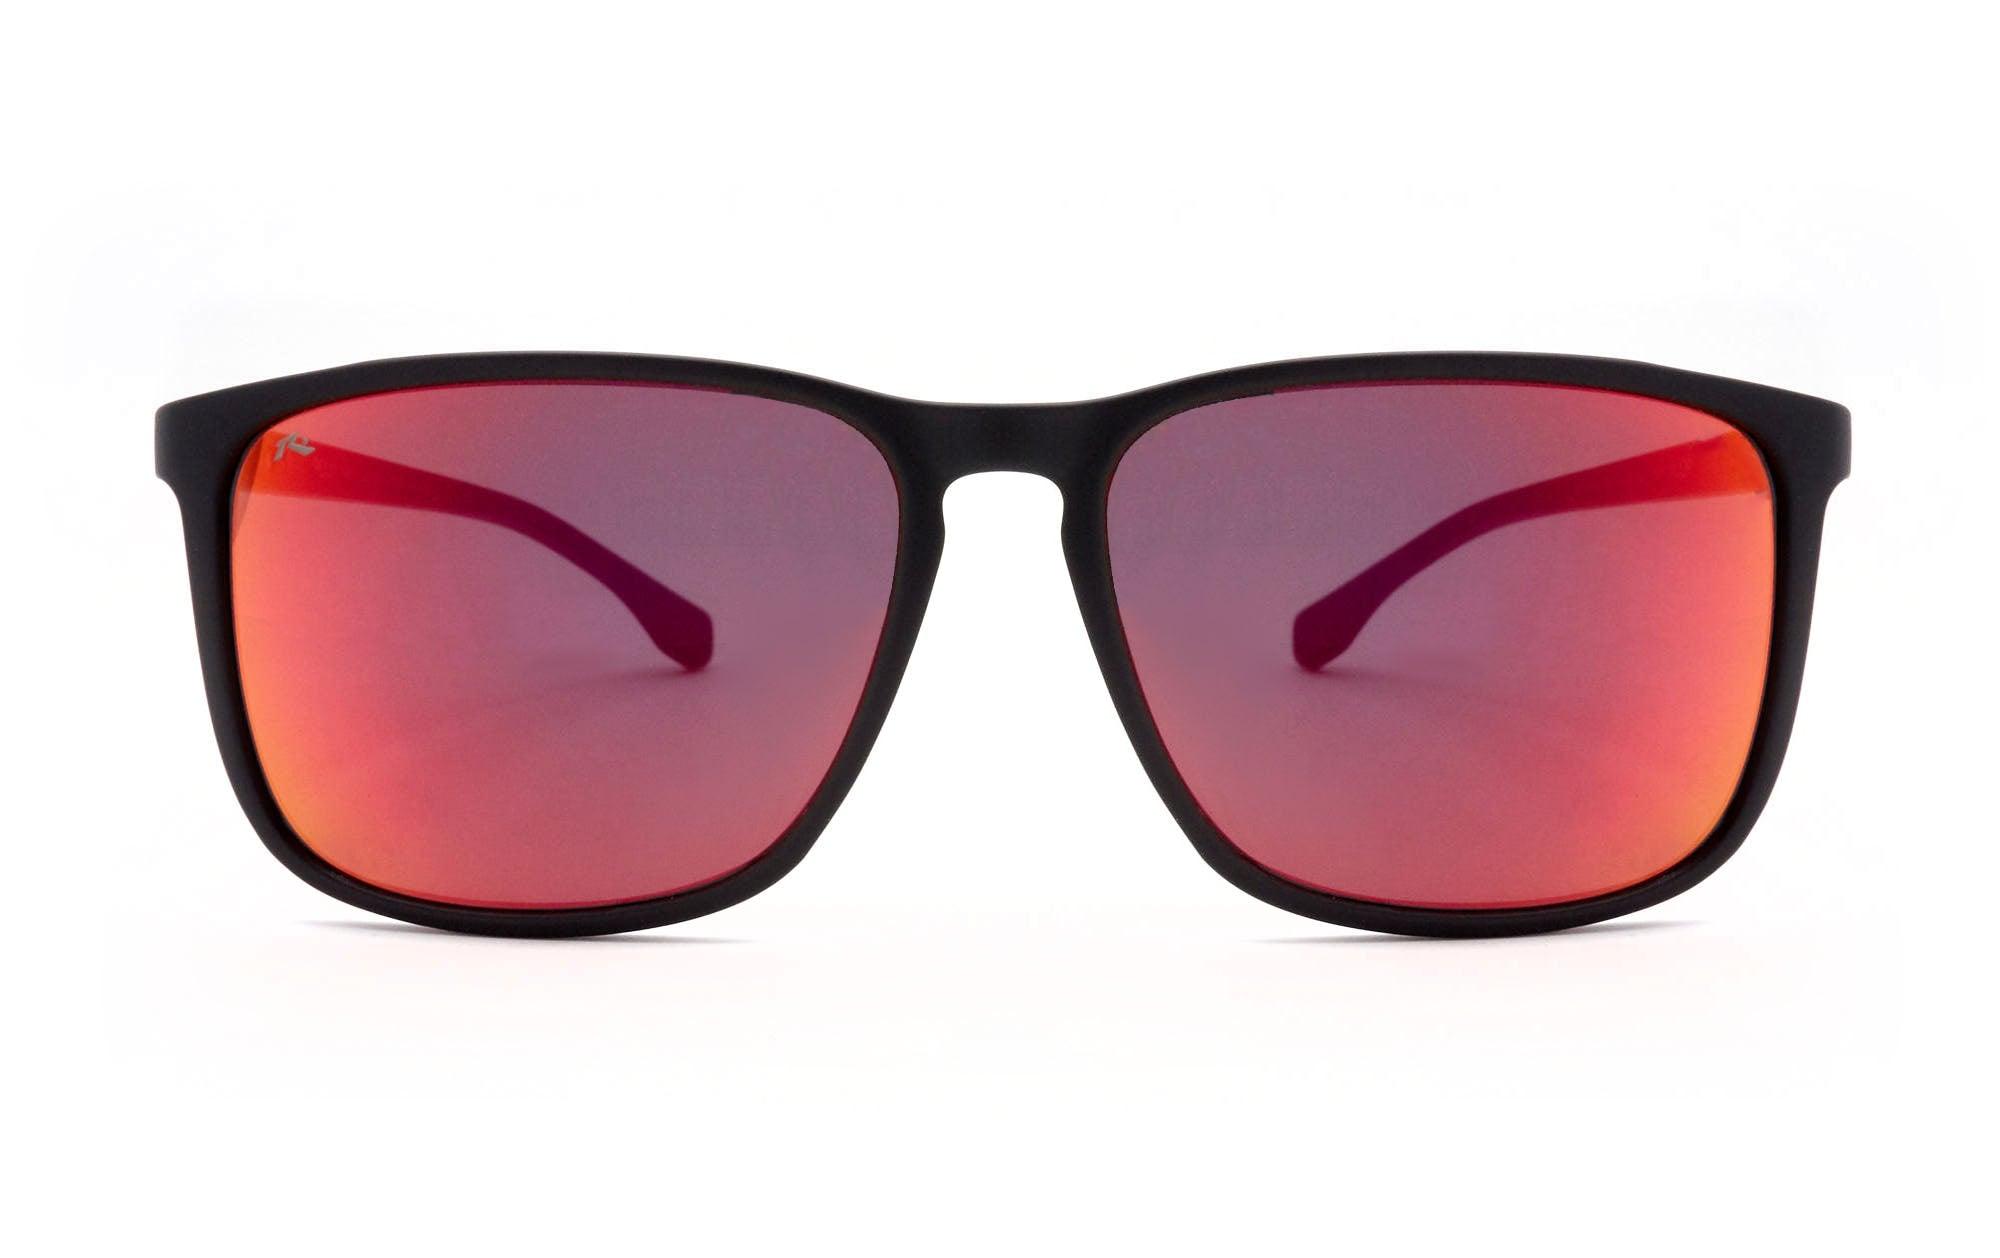 rusty roum mblk revo red - Opticas Lookout